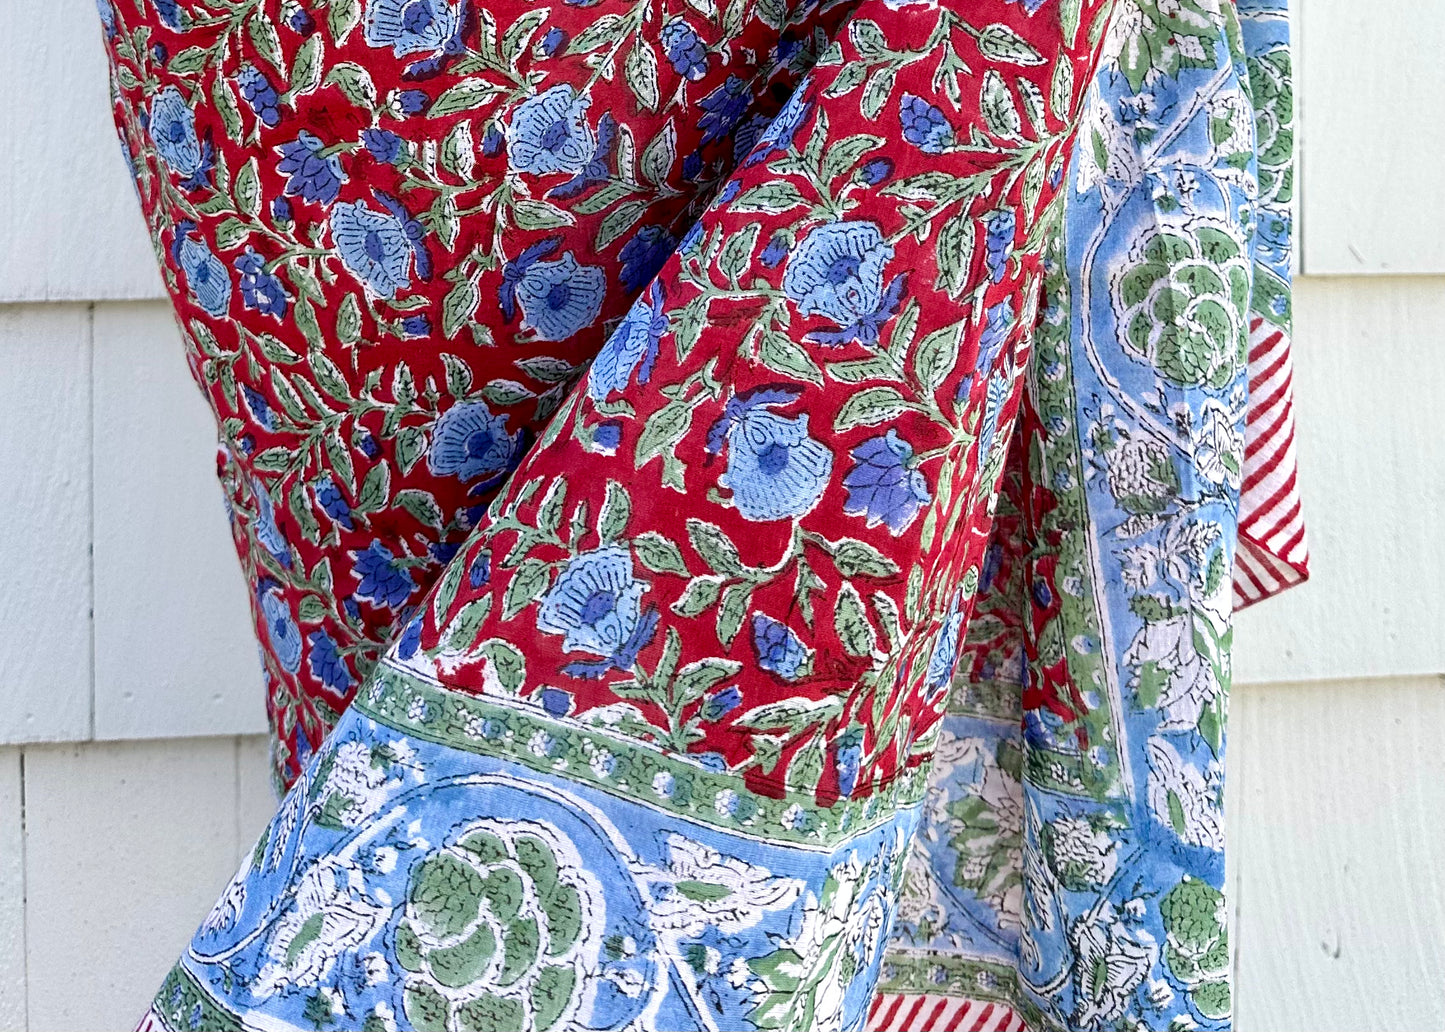 Blue and Red Block Print Cotton Sarong, Cotton Summer Scarf, Beachwear, Swimsuit Coverup, Bachelorette Gift - DharBazaar